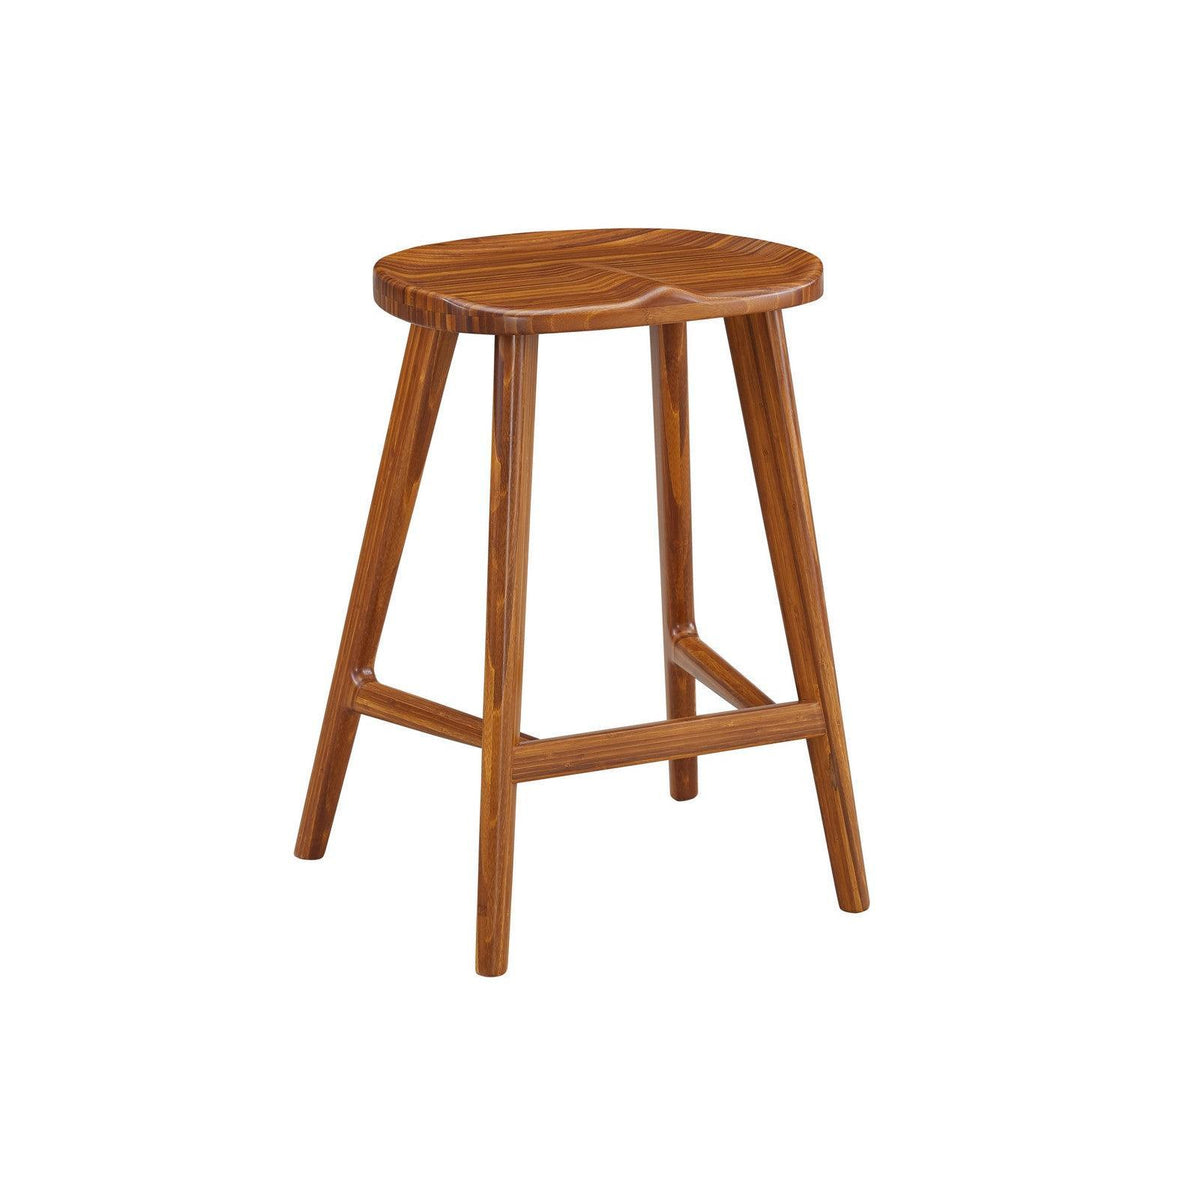 Greenington Max Stool in Counter Height, Amber - GM0008AM - 1